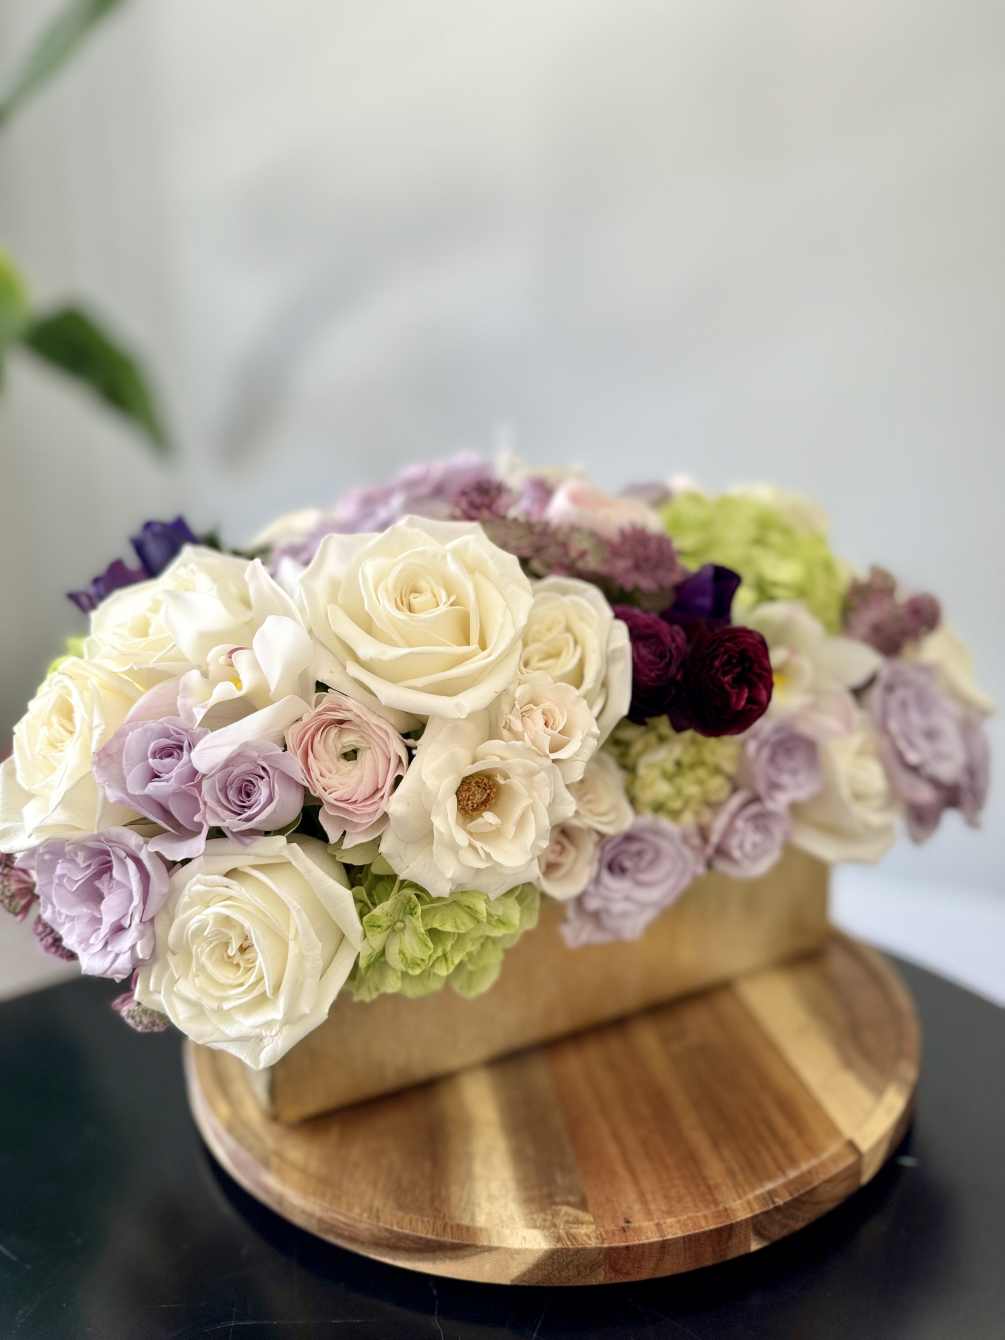 A lush a full arrangement with roses, ranunculus, orchids, hydrangeas and spray